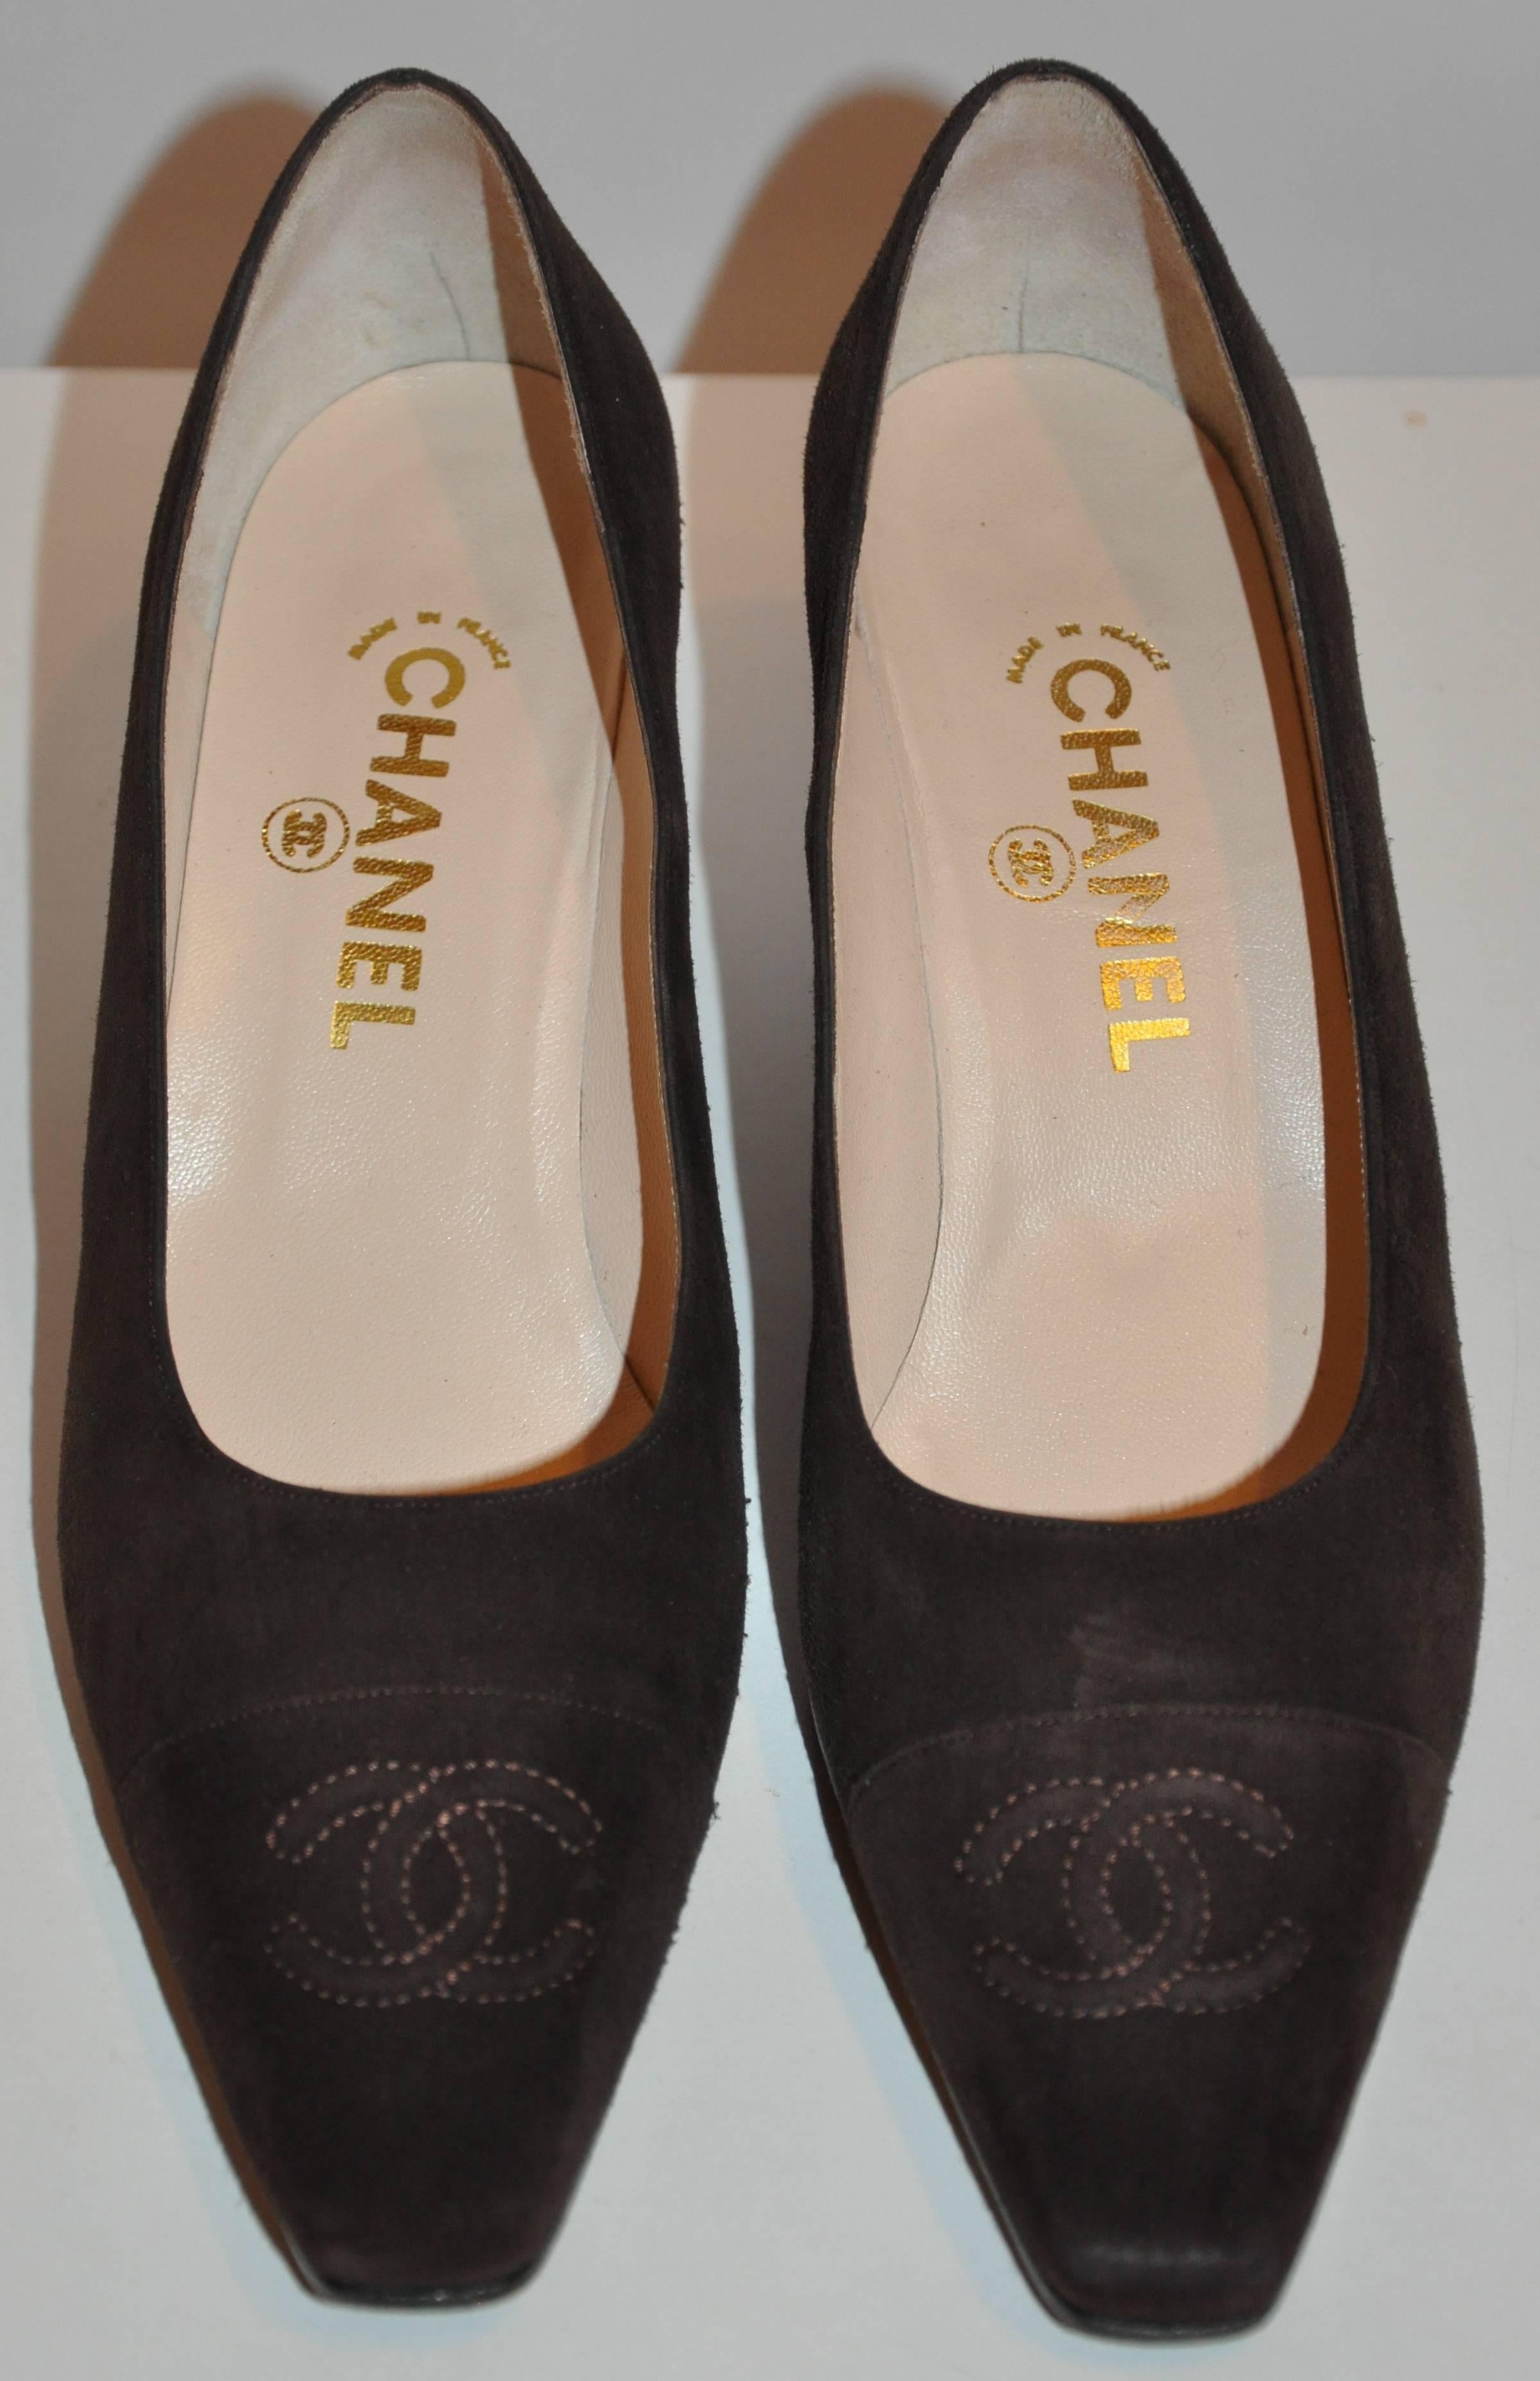         Chanel's wonderfully elegant coco-brown signature butter-soft lambskin suede mid-heel pumps is accented with their signature logo in front. The heels measures 2 1/2